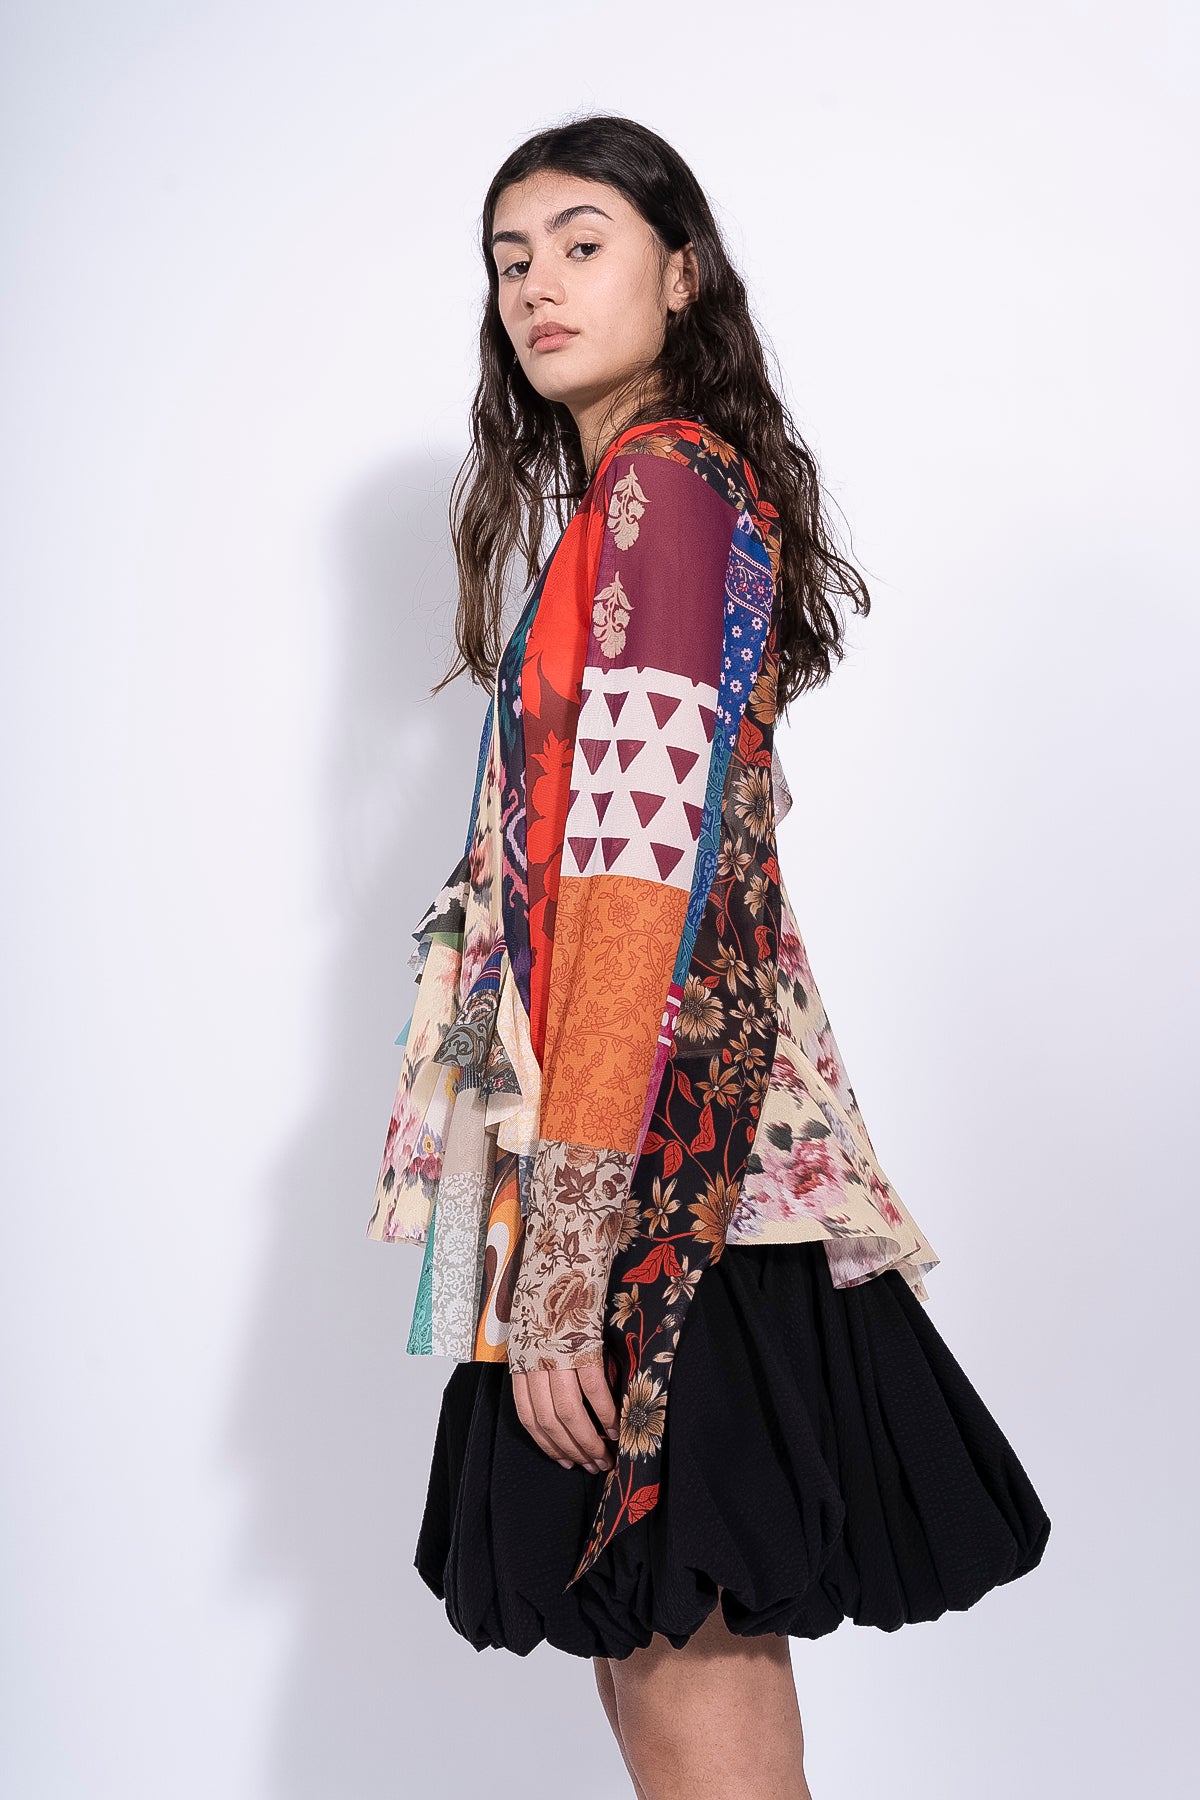 PATCHWORK PRINT MESH TOP WITH FRILLS marques almeida